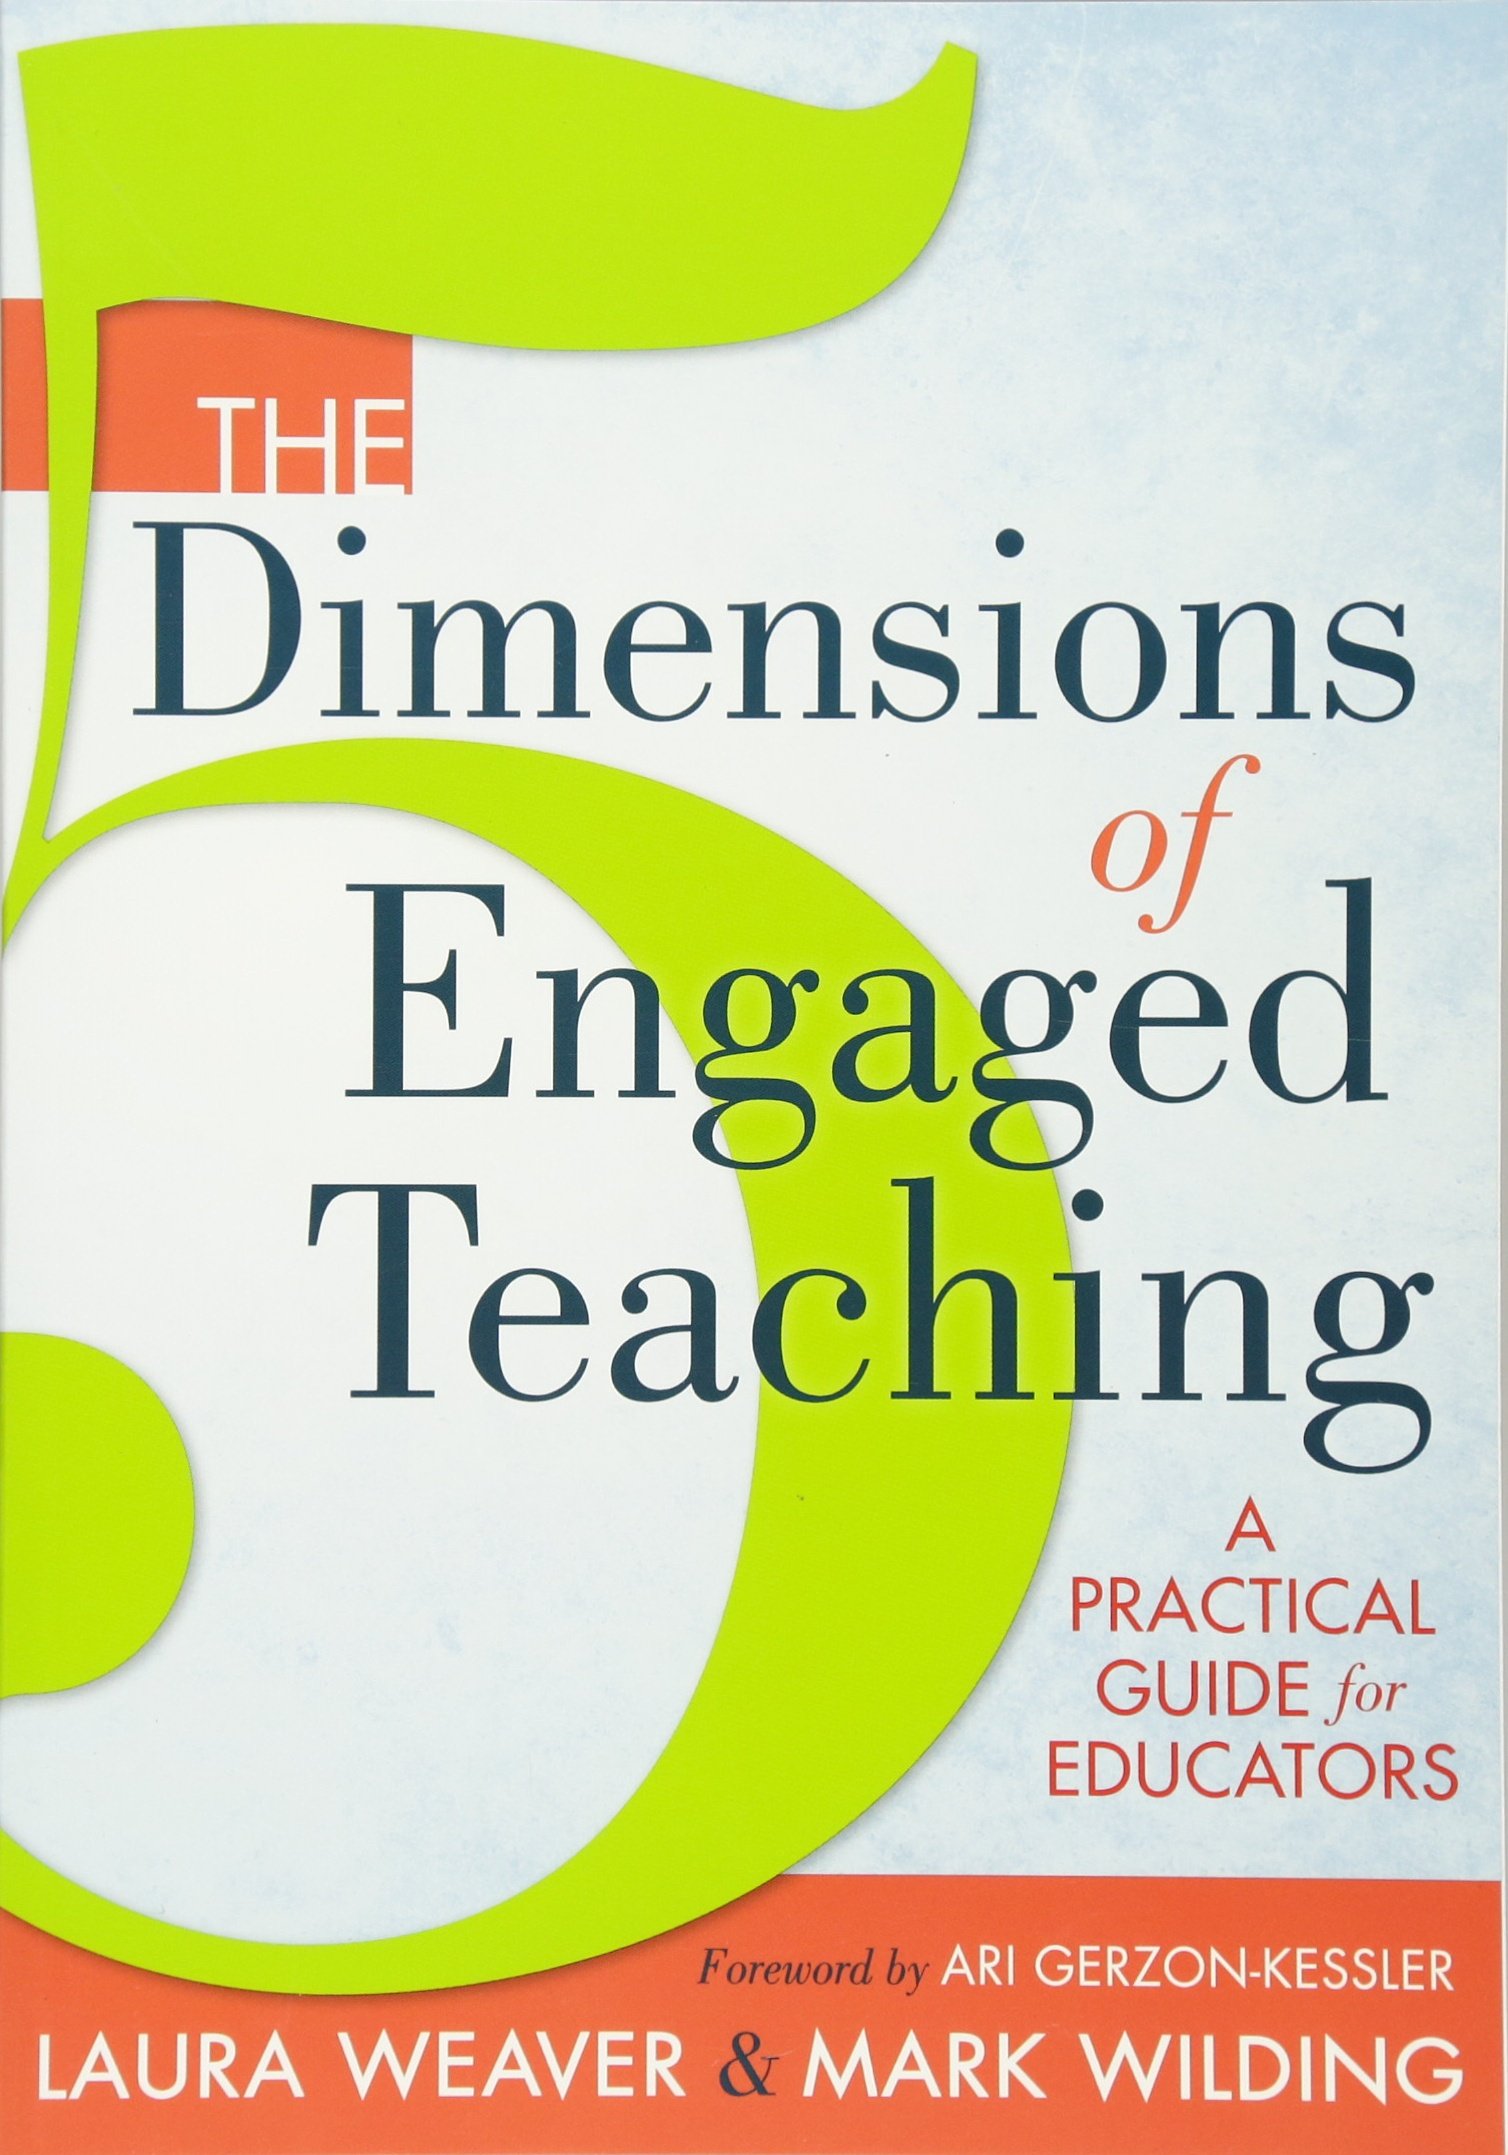 The Five Dimensions of Engaged Teaching: A Practical Guide for Educators